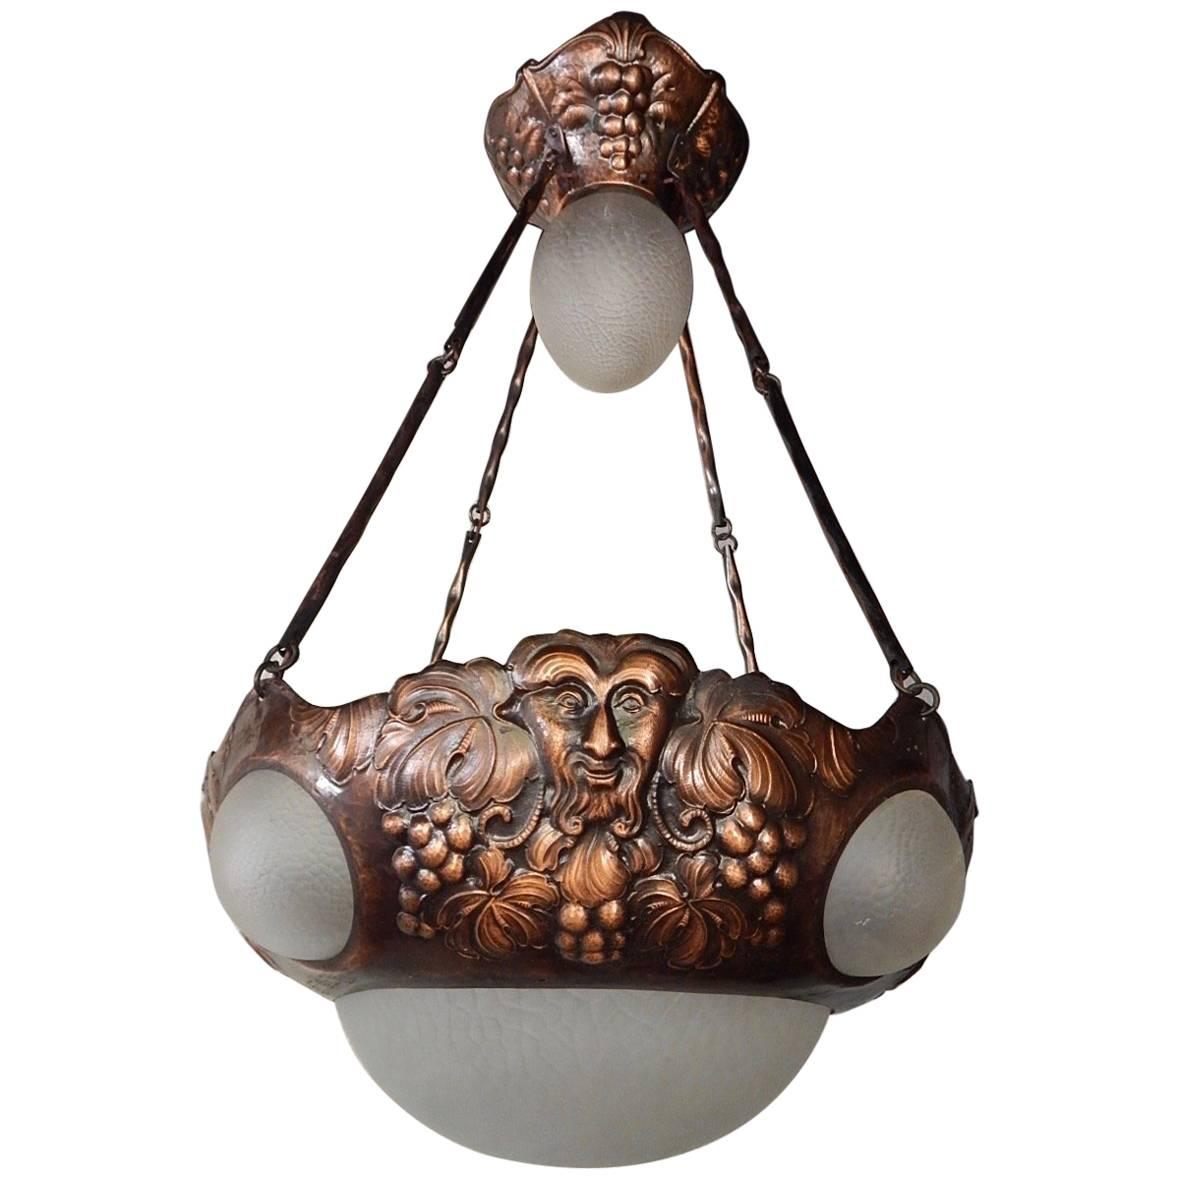 Swedish Arts and Crafts Hammered Copper Hanging Fixture #18, Circa 1910 For Sale